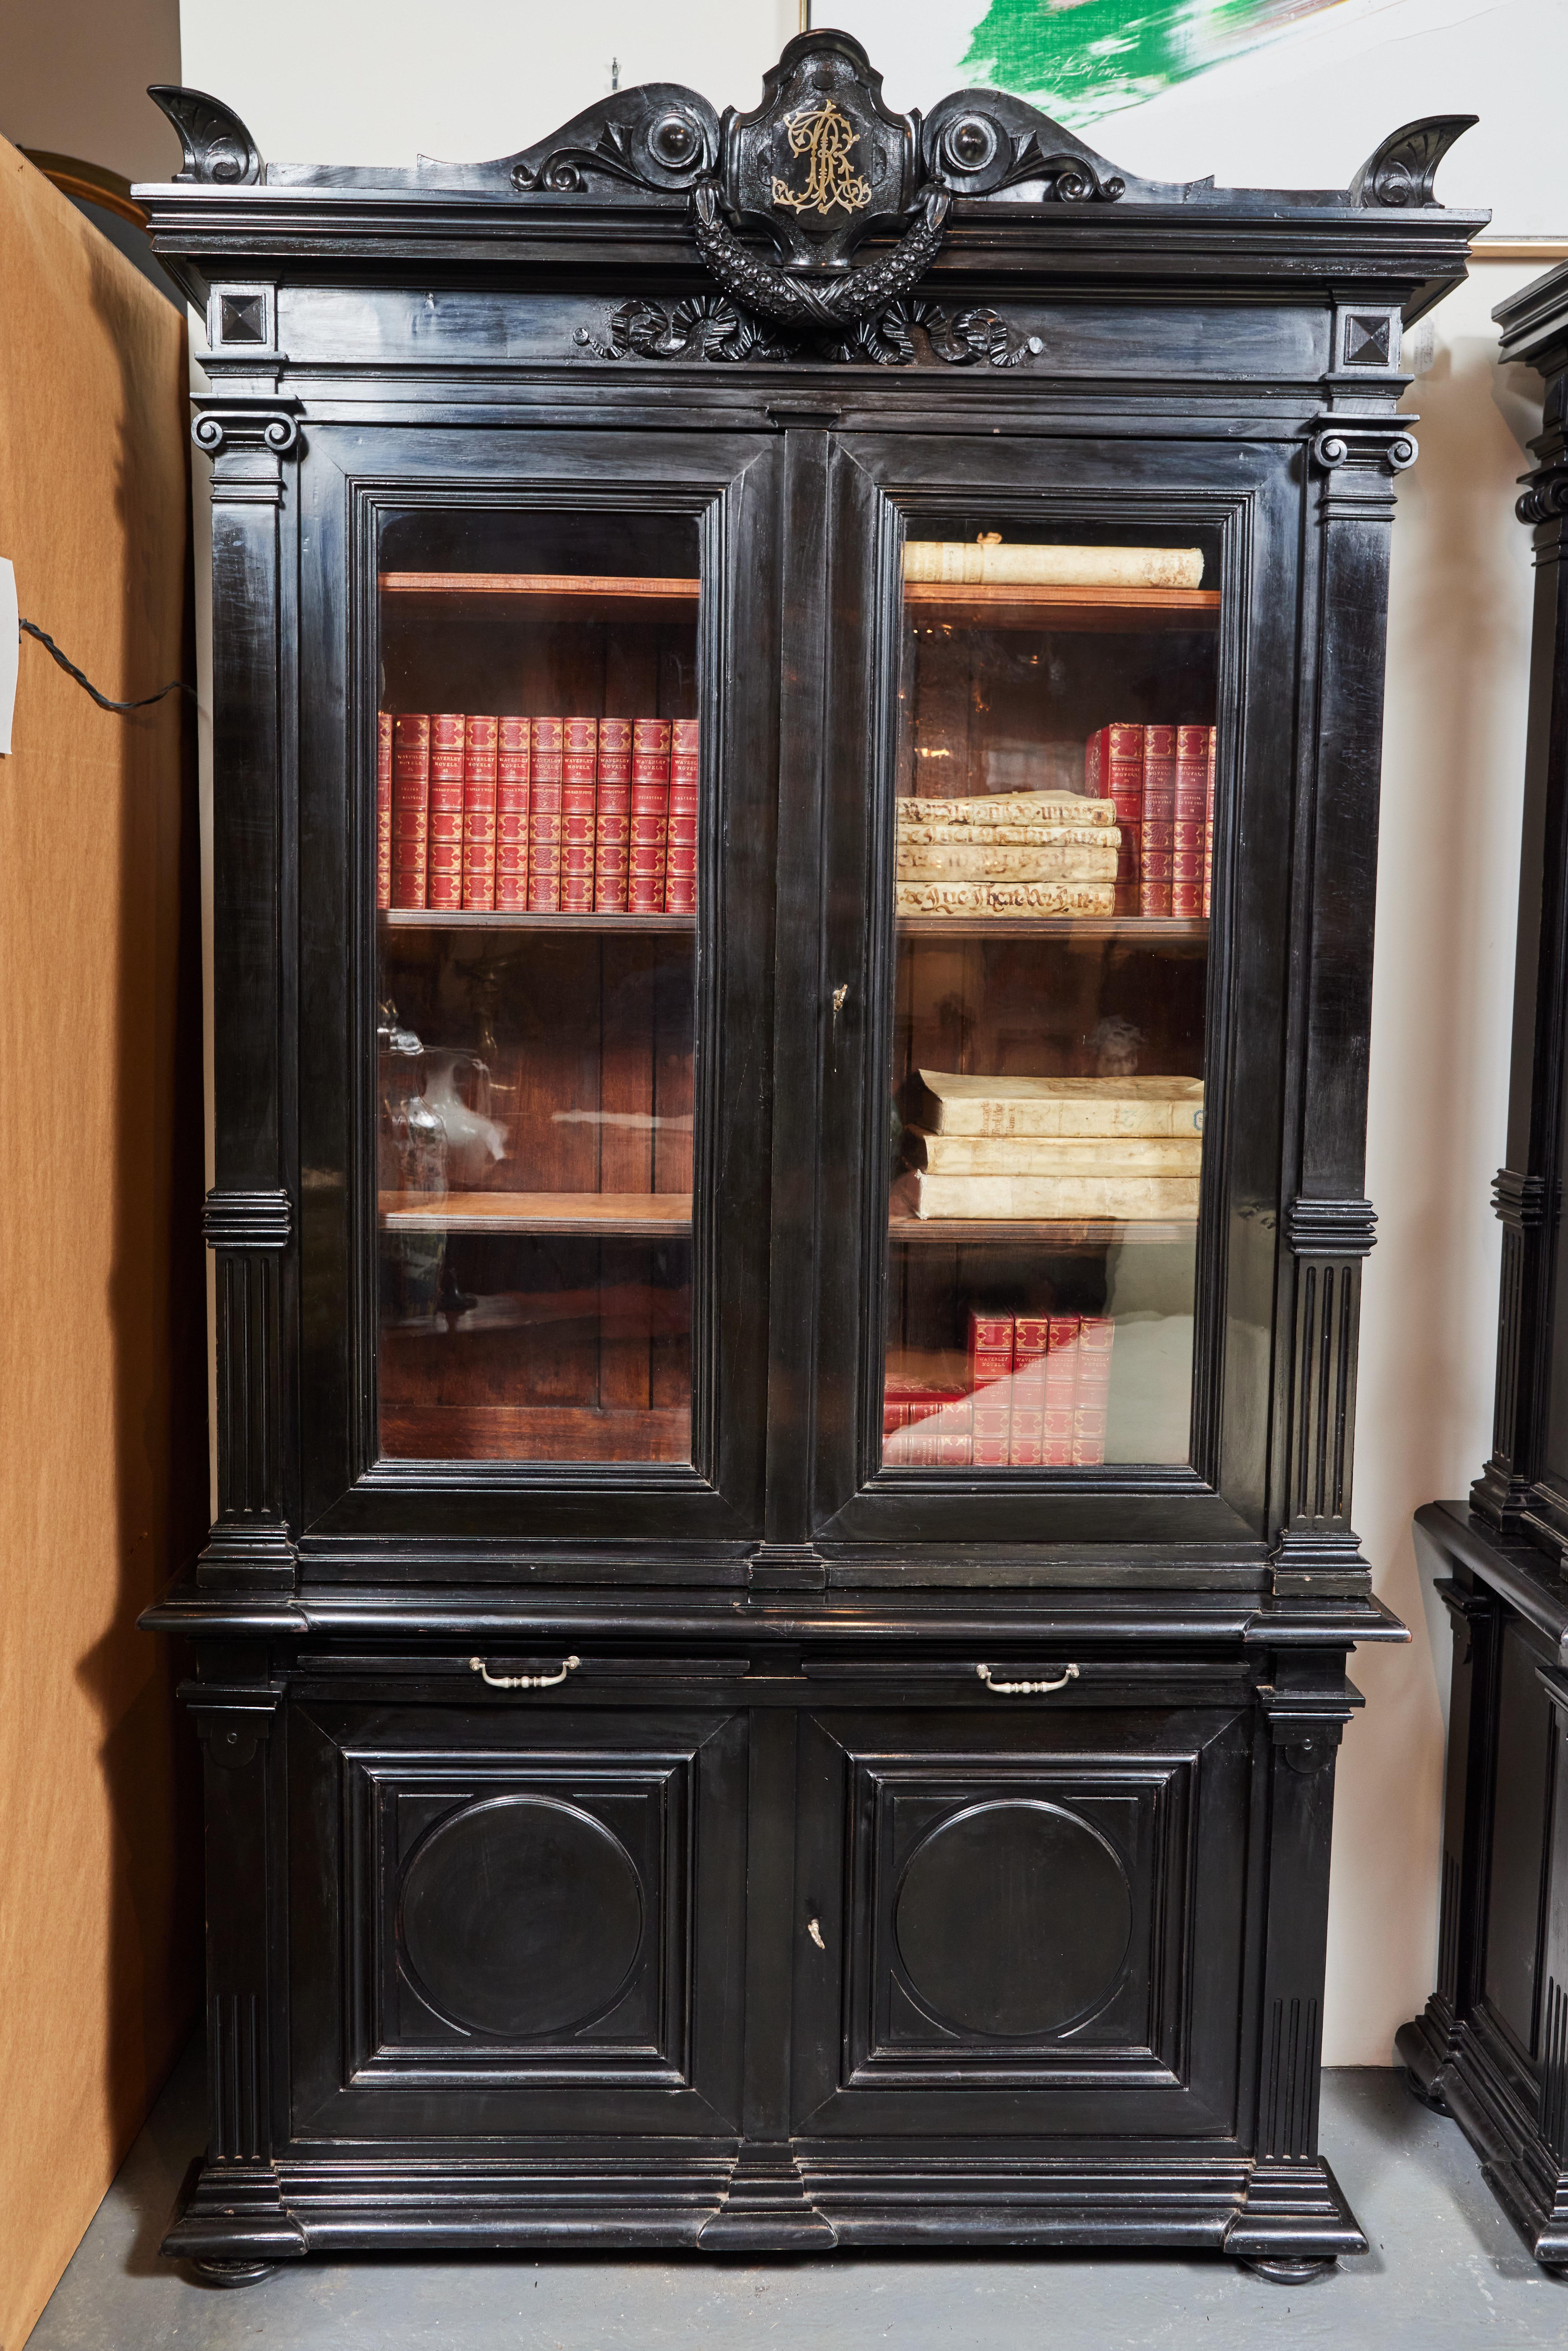 A substantial, rare pair of mated, hand-carved, ebonized, turn-of-the-century, two part Italian bookcases. Each with glass front doors bordered by fluted, faux pilasters rising to Ionic capitals supporting an entablature featuring a stunning